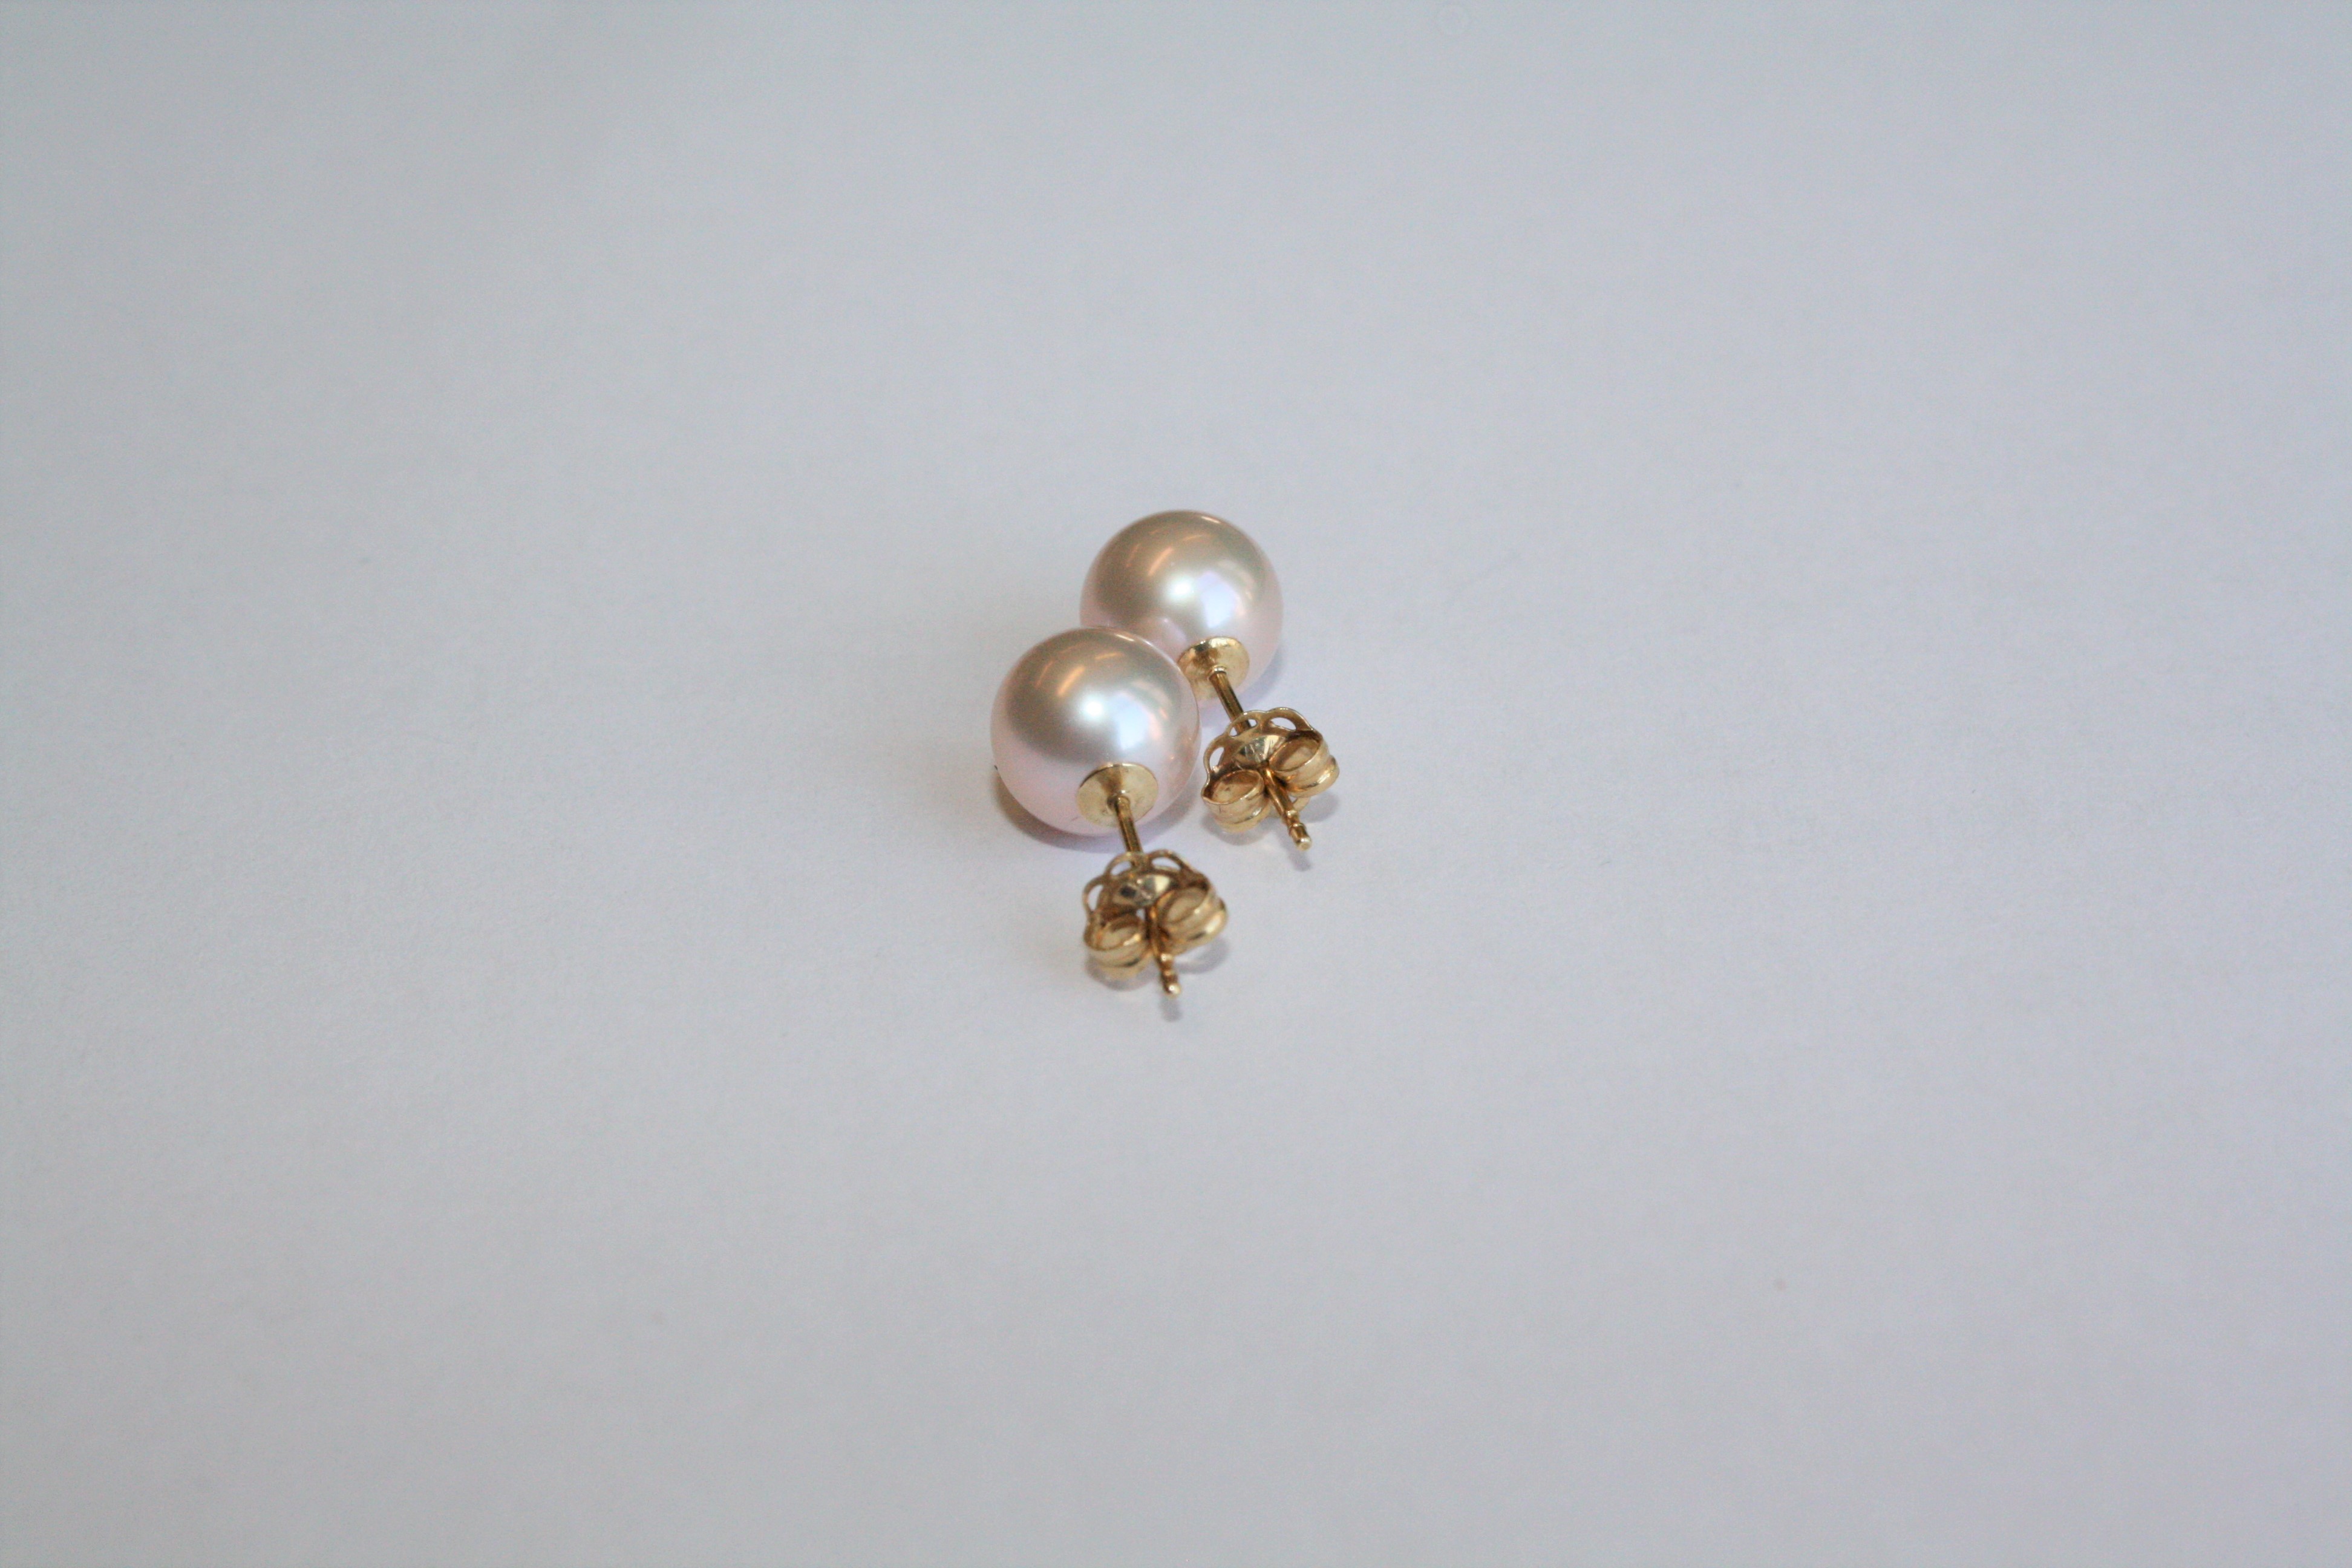 A PAIR OF CULTURED PEARL AND YELLOW GOLD EARRINGS - Image 2 of 2